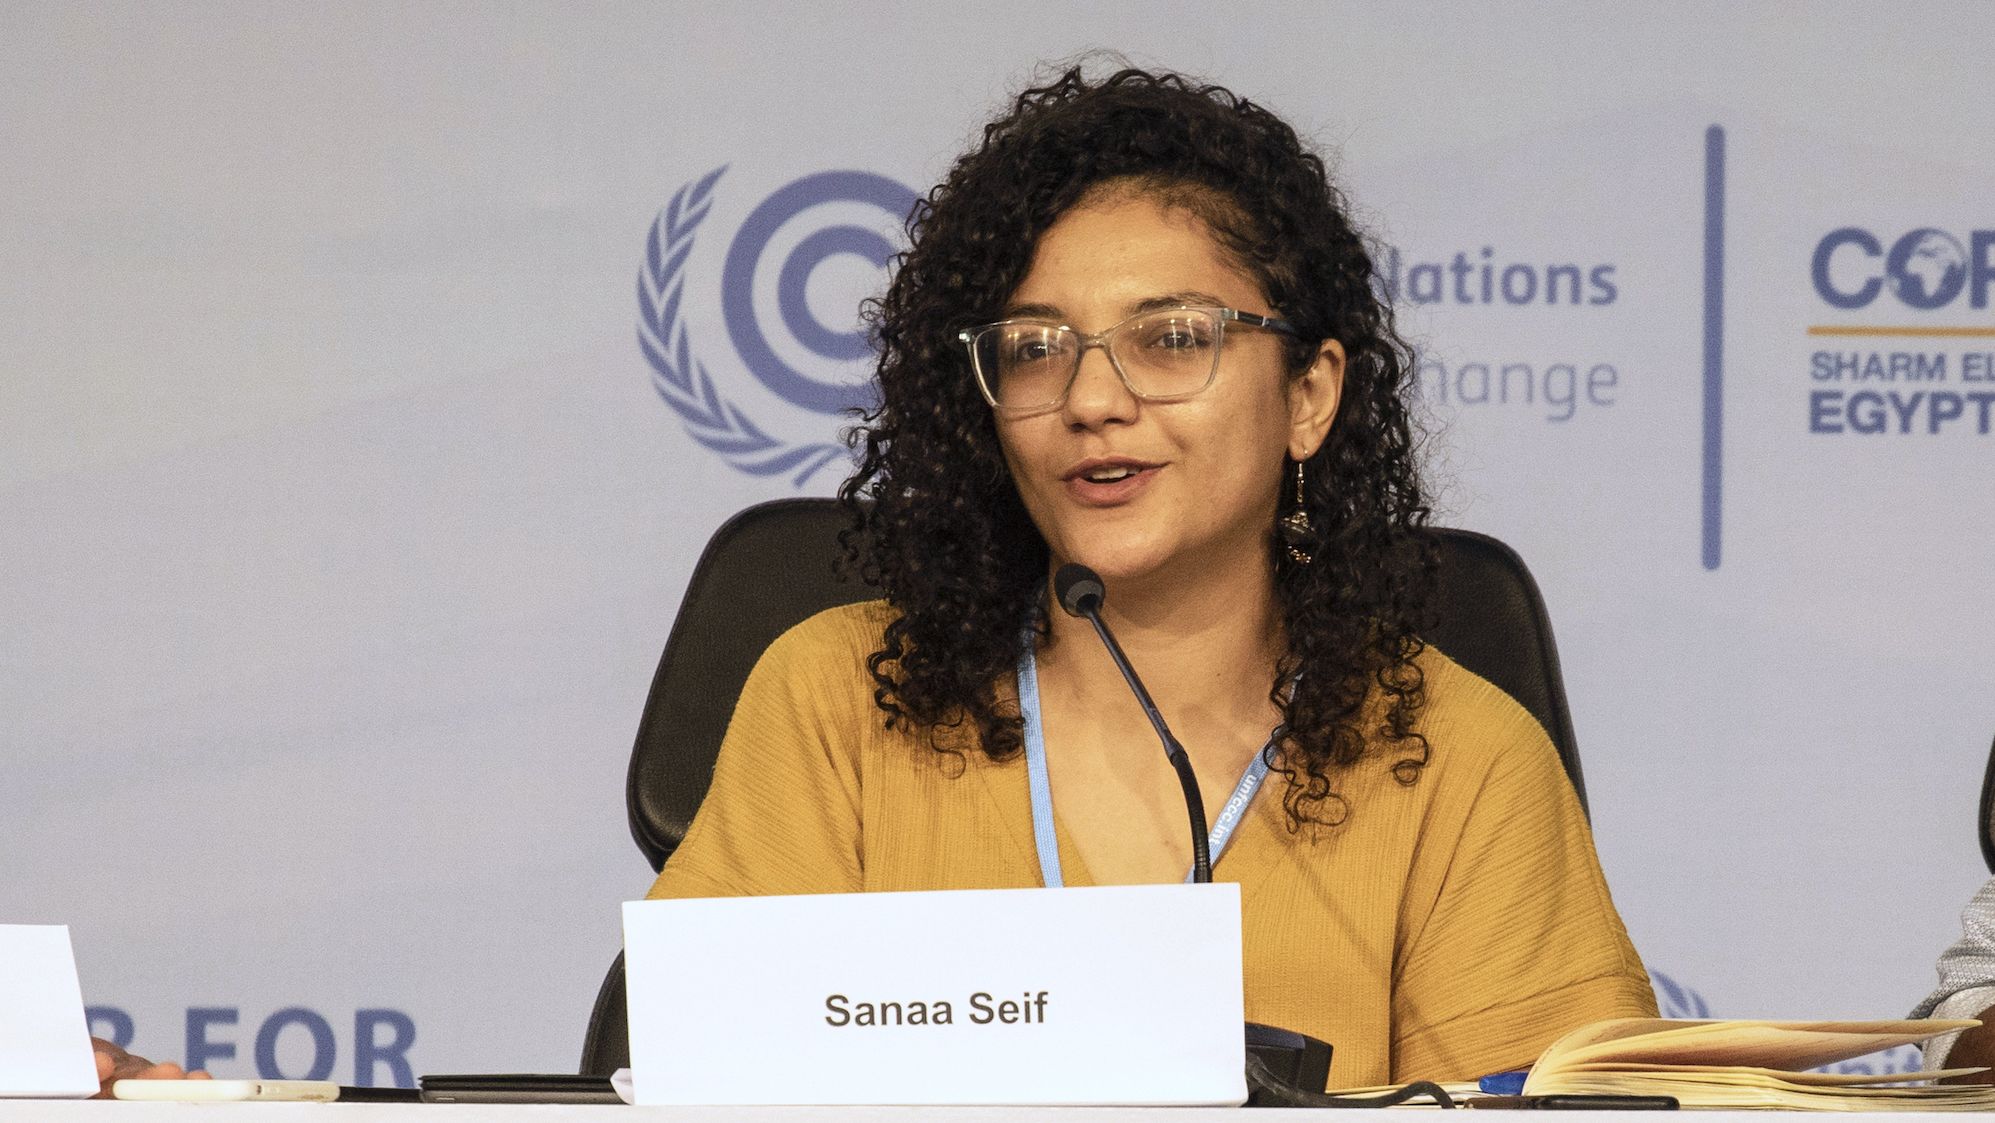 Sanaa Seif, sister of Egyptian-British jailed activist Alaa Abdel-Fattah, who is on a hunger and water strike, speaks during a press conference on Alaa situation during the 2022 United Nations Climate Change Conference COP27 at the International Convention Center.